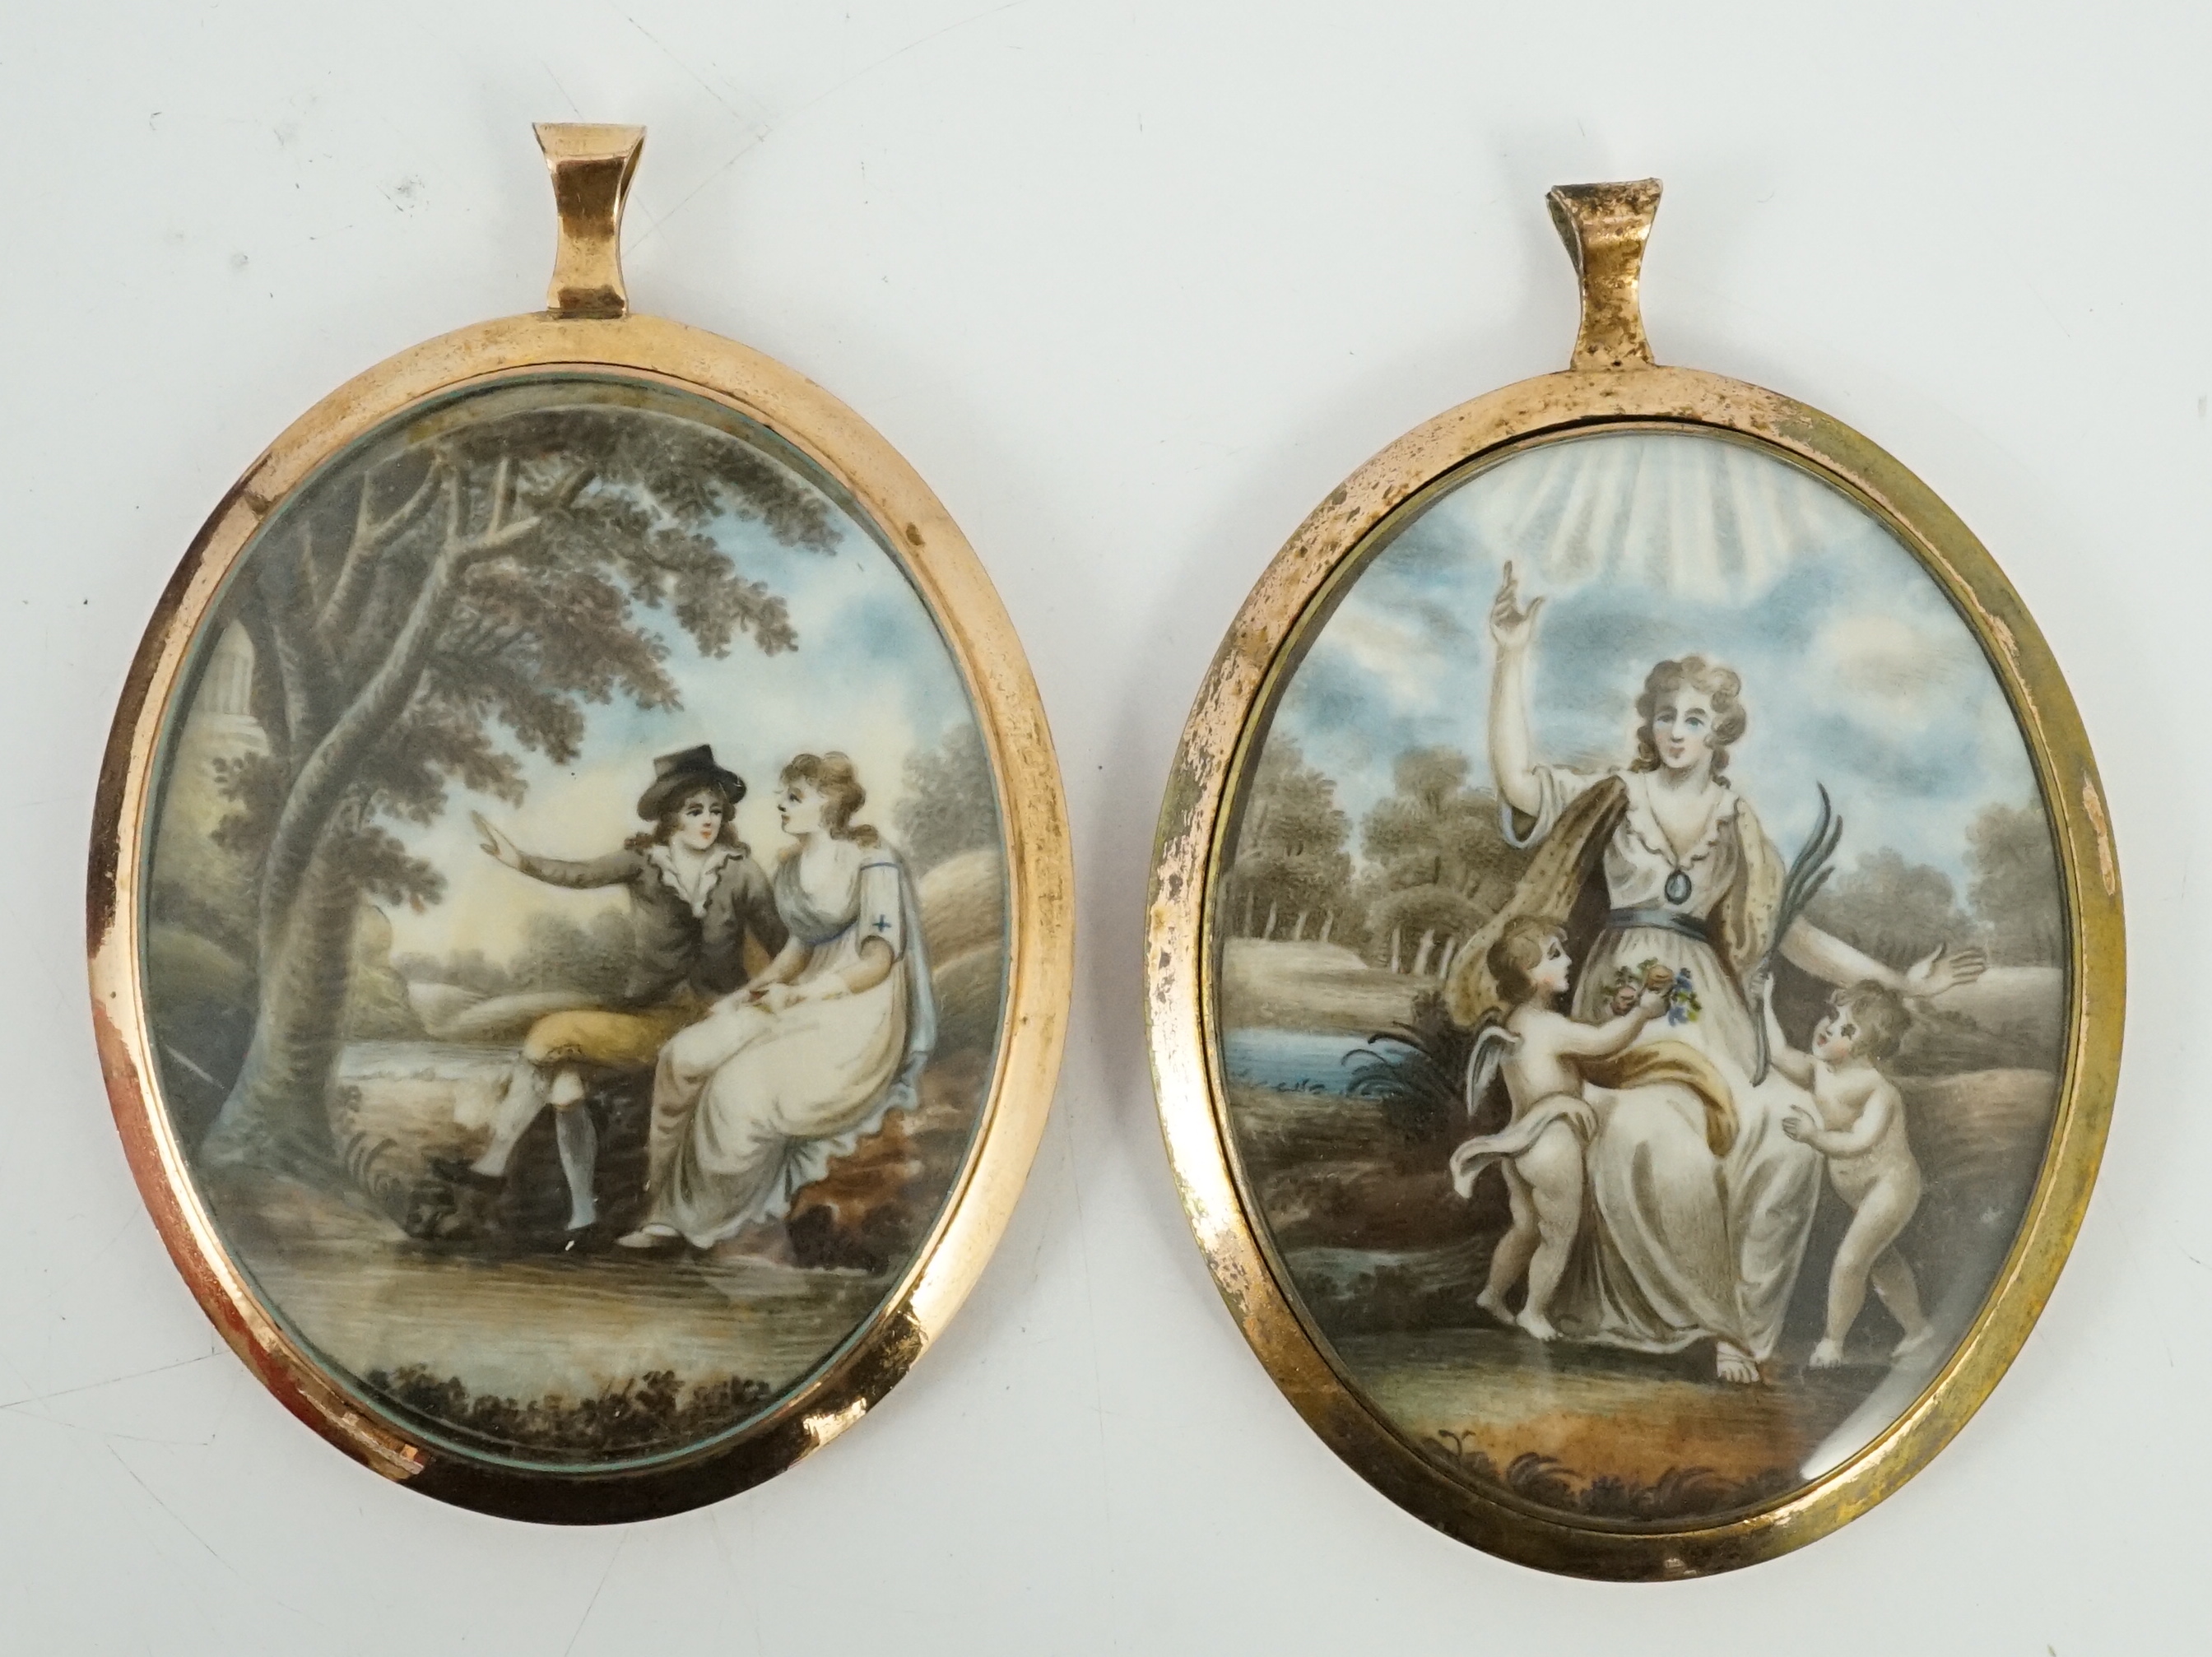 Attributed to Frederick Buck of Cork (Irish, 1771-1833), Portrait miniatures of an army officer and his wife; Charity and rustic lovers verso, watercolour on ivory, 6 x 4.75cm. CITES Submission reference 5NH5T3JW